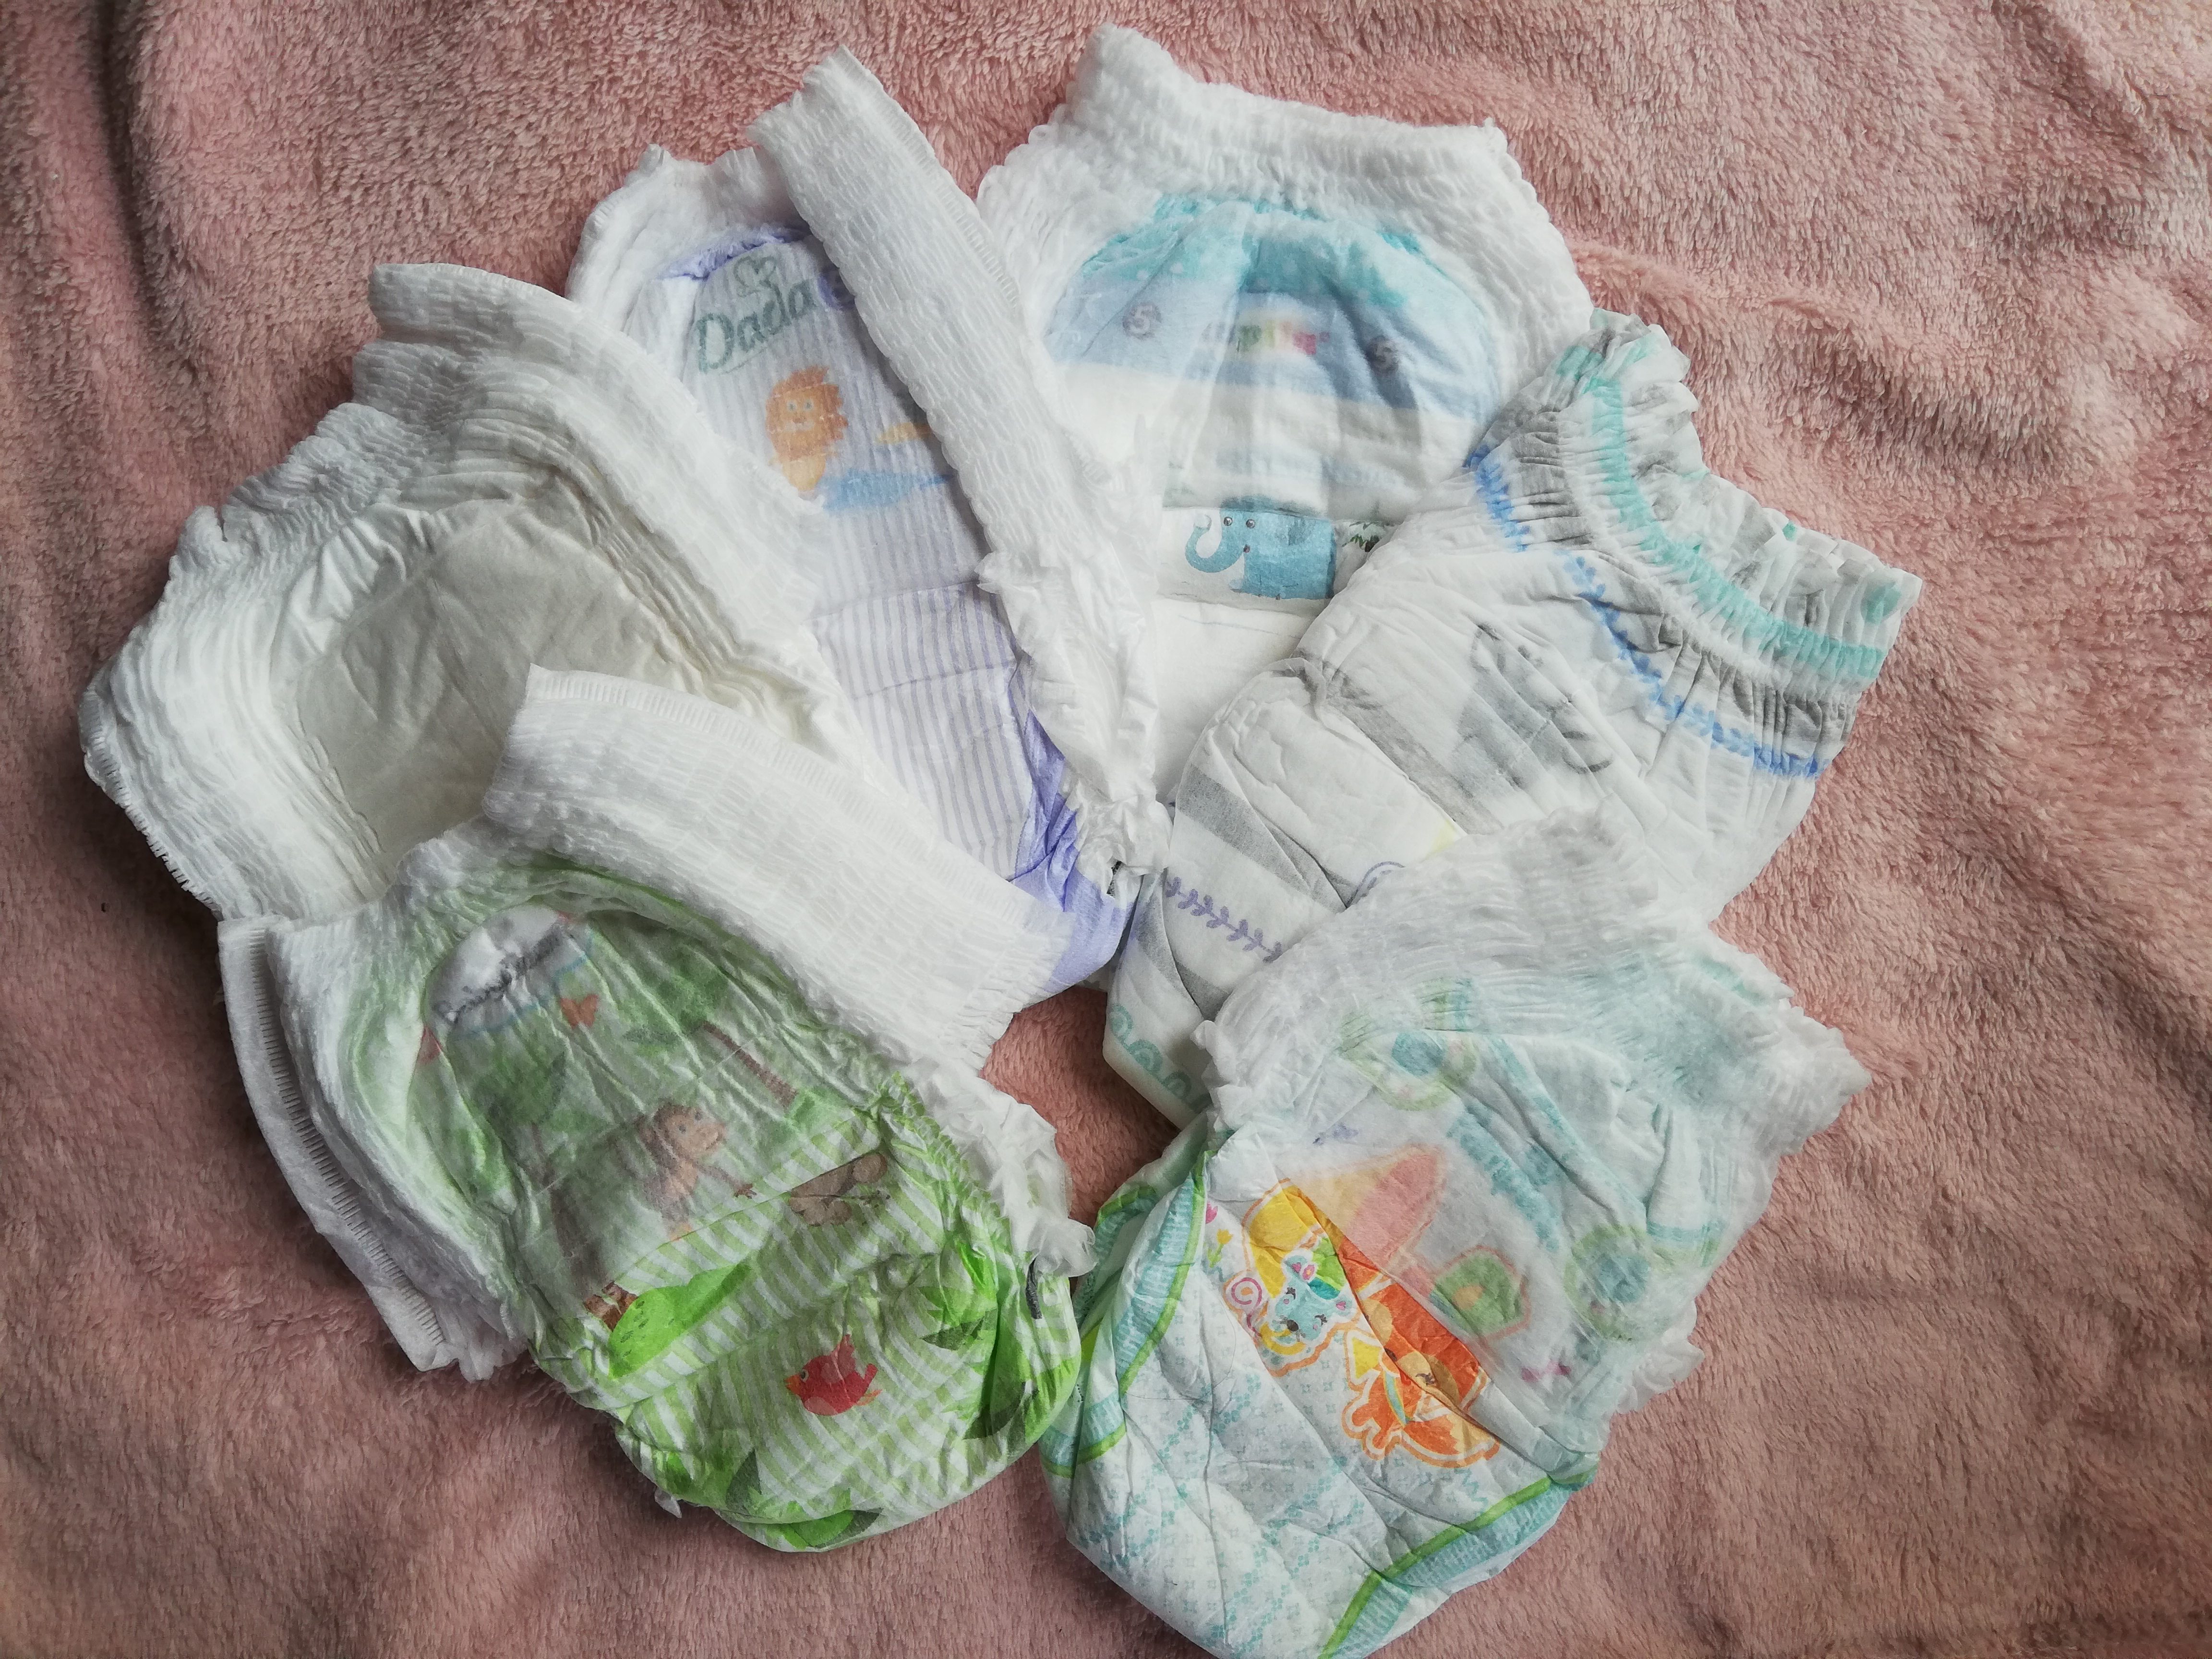 pampers active baby 3 70 szt